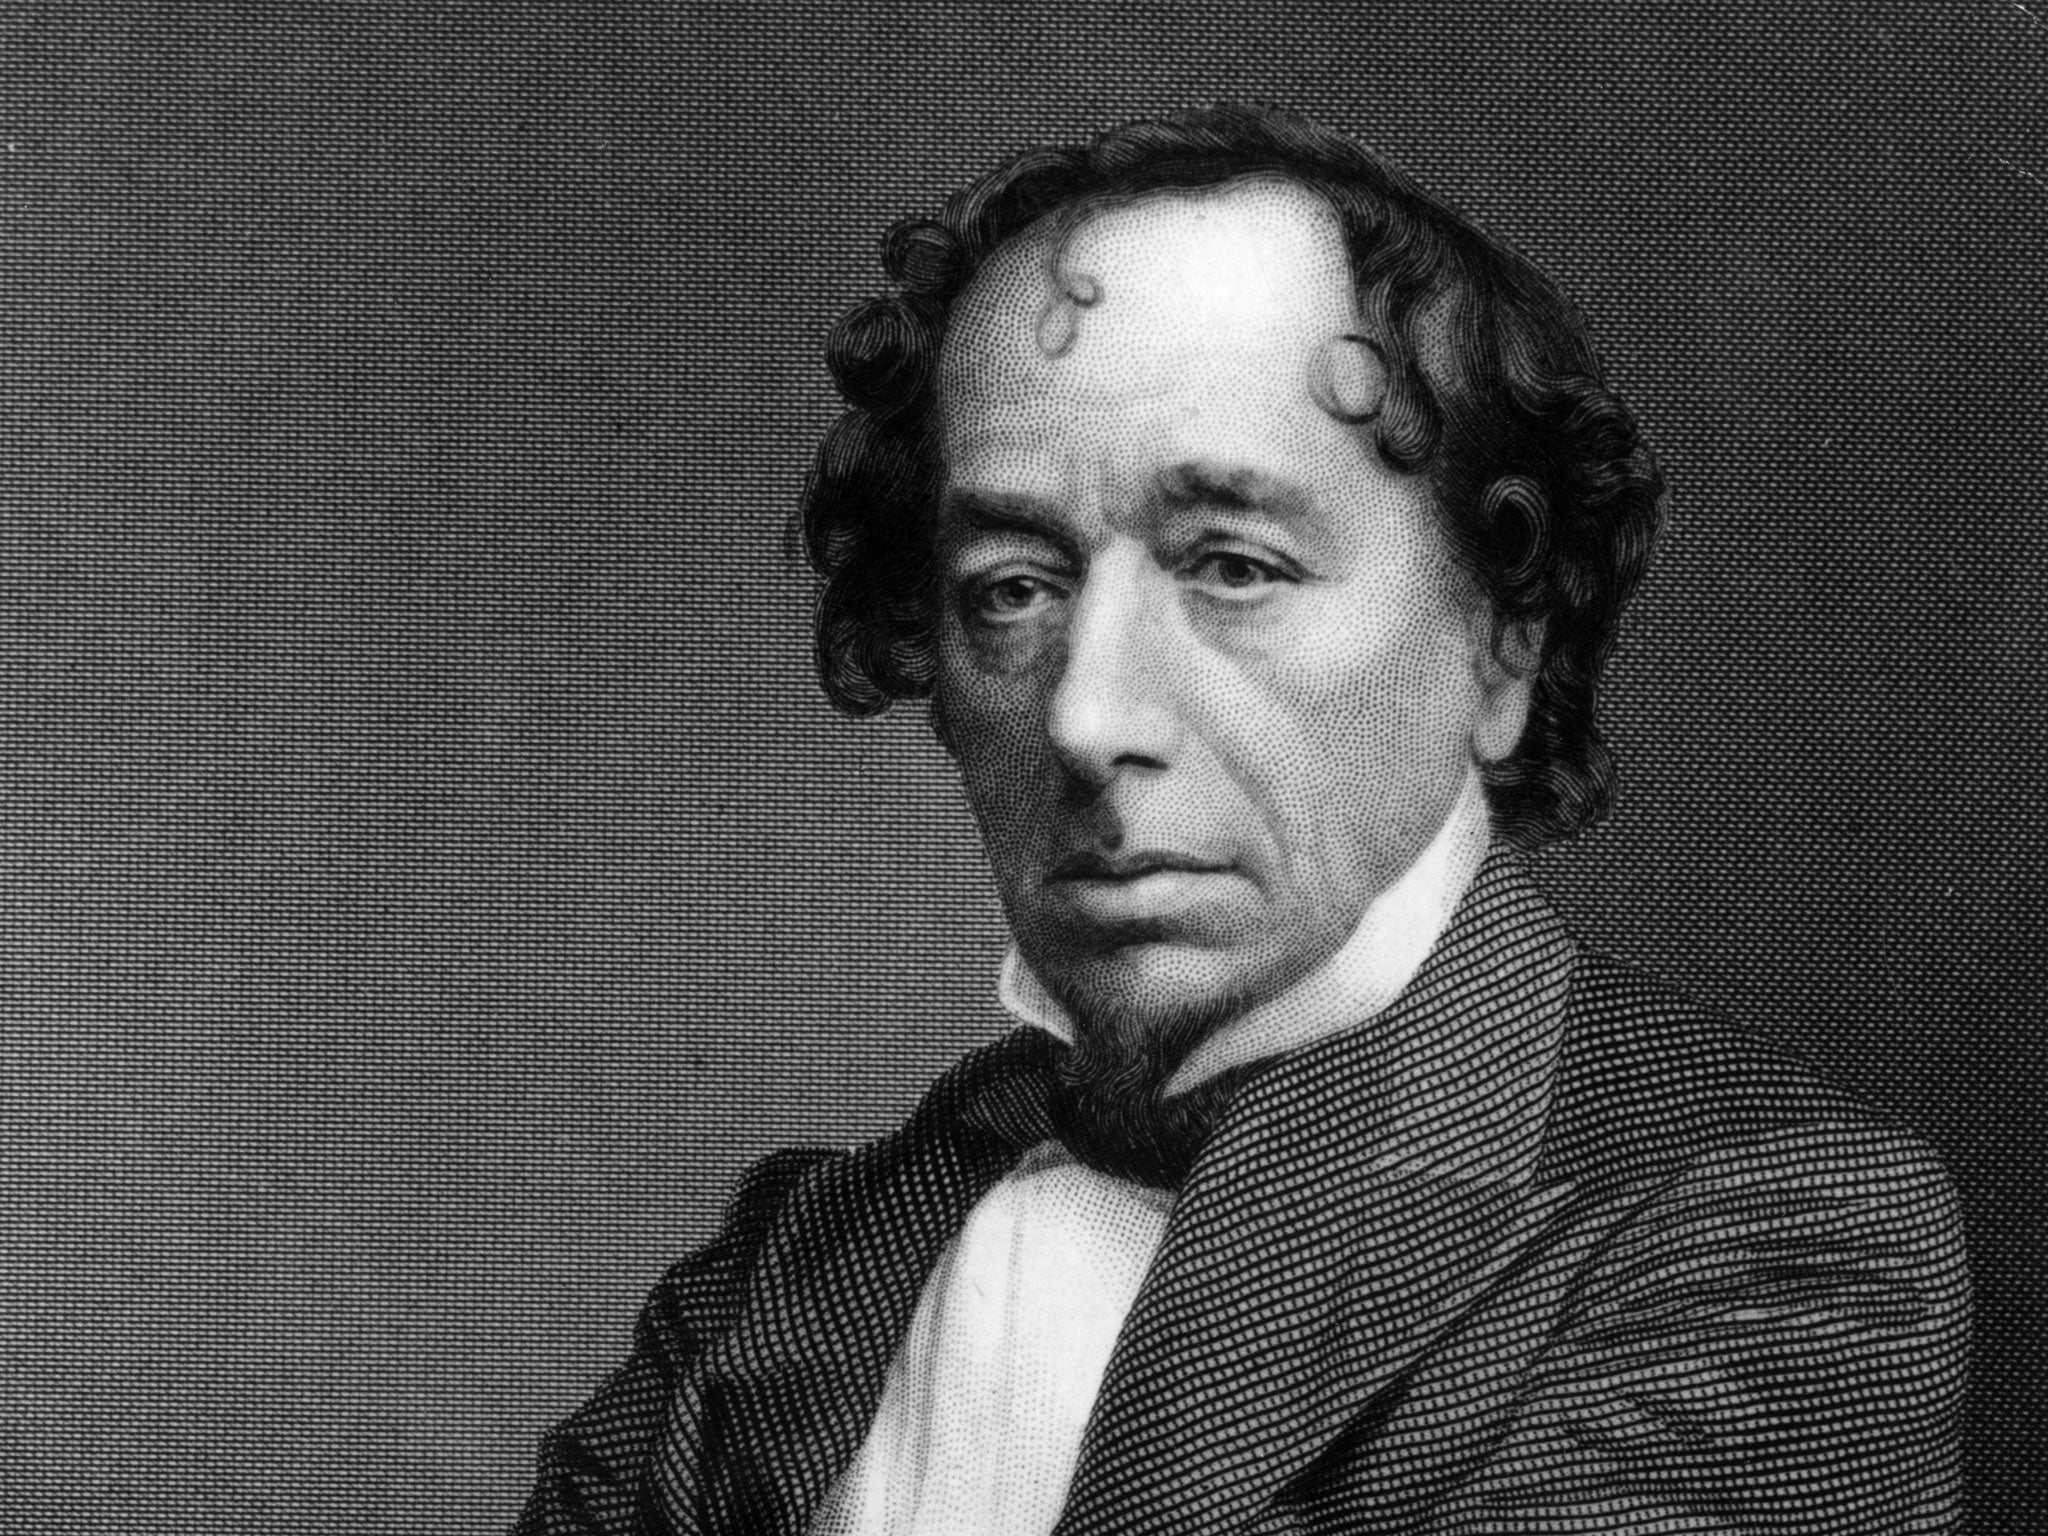 Which phrase regarding the persuasive power of numbers did Mark Twain attribute to Benjamin Disraeli (pictured)?